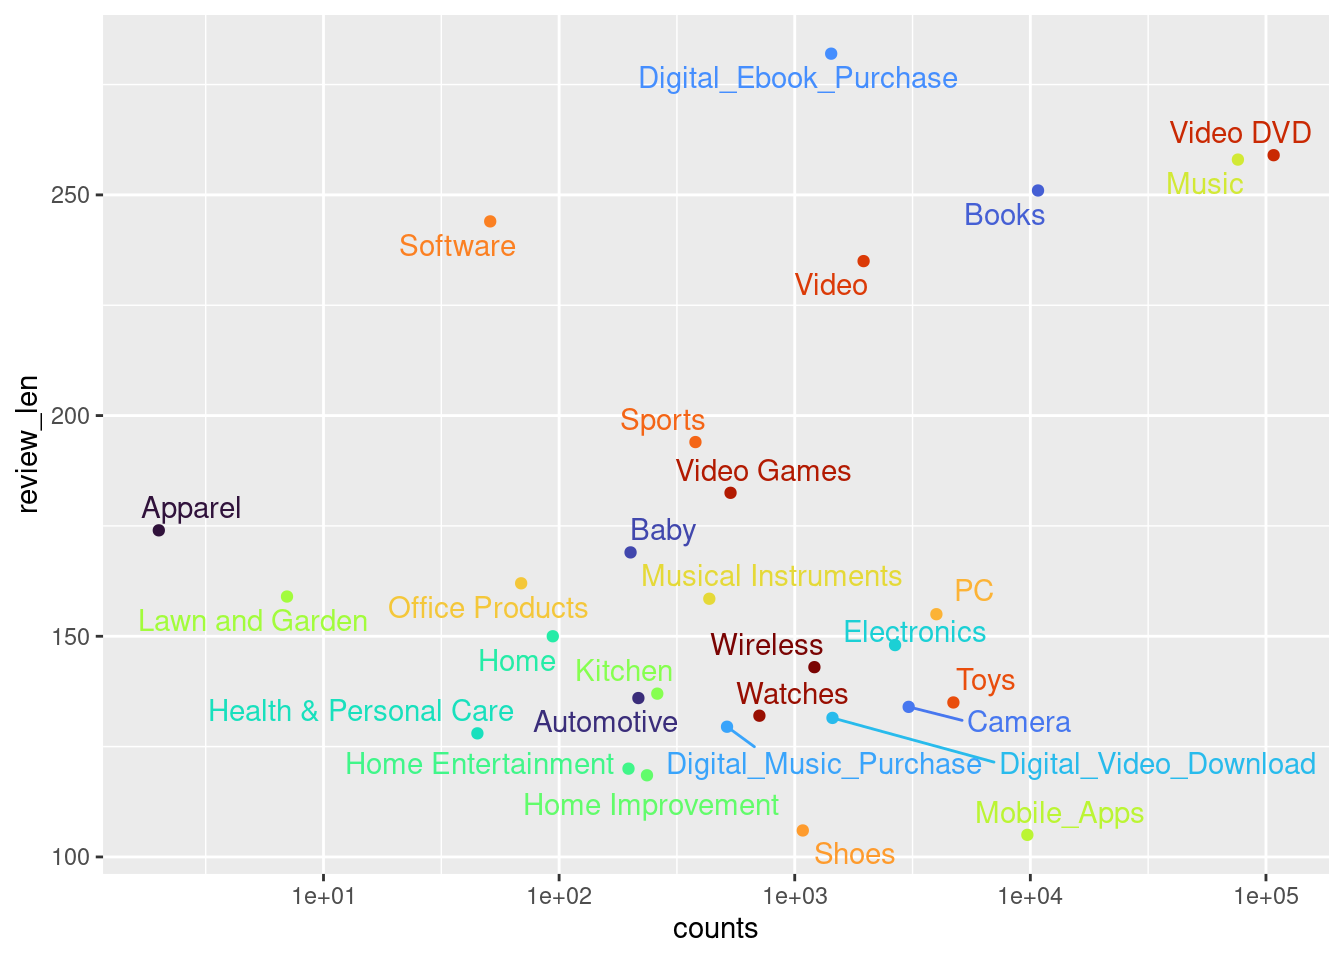 Scatterplot of review counts vs. review lengths where points are colored by product categories.